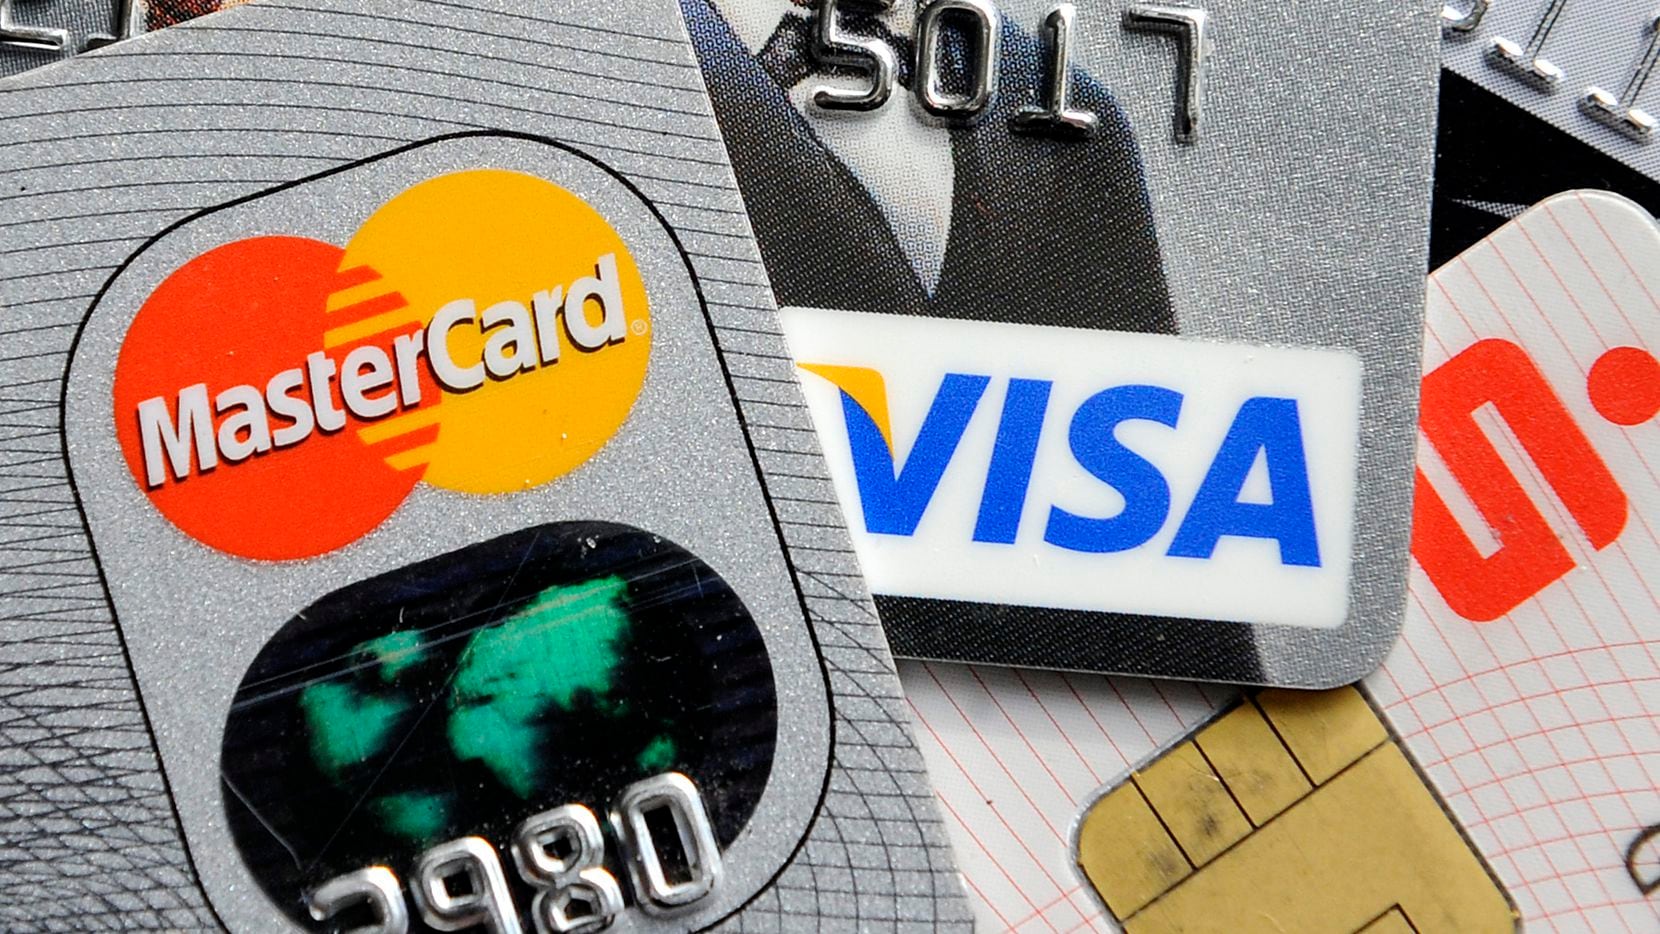  Retailers and credit card companies are not the only targets of cyber attacks. One-third of...